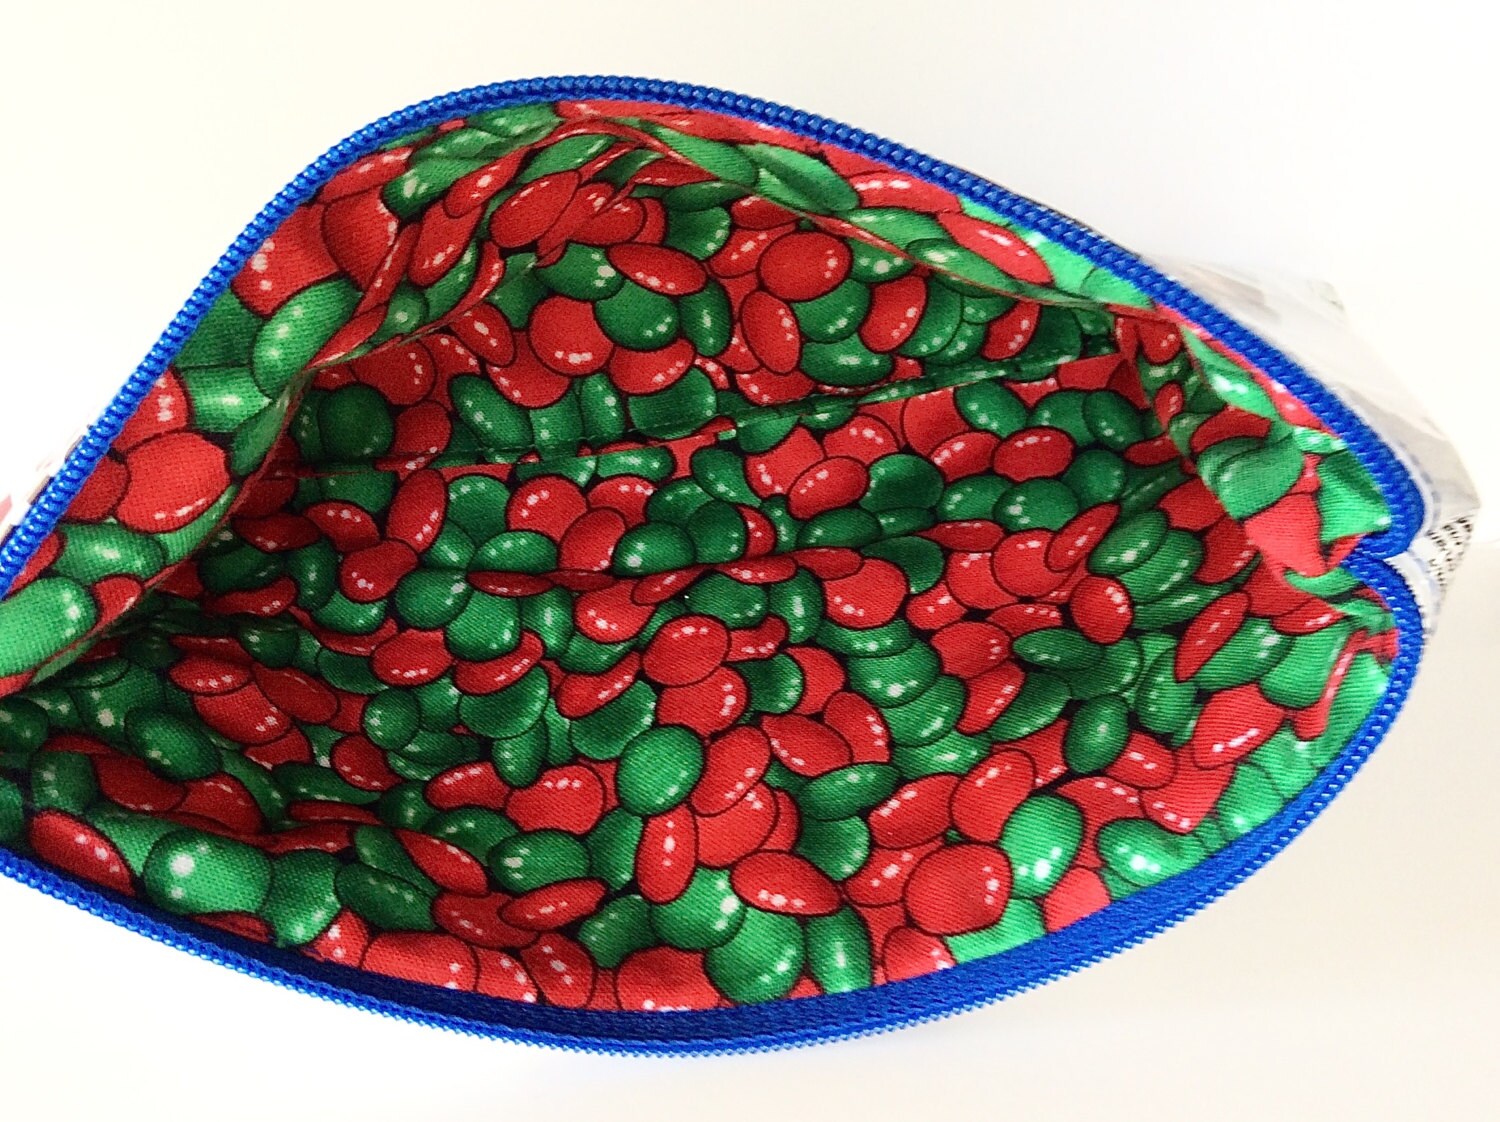 M&ms Mega Candy Wrapper Up-cycled Zippered Bag/pouch 